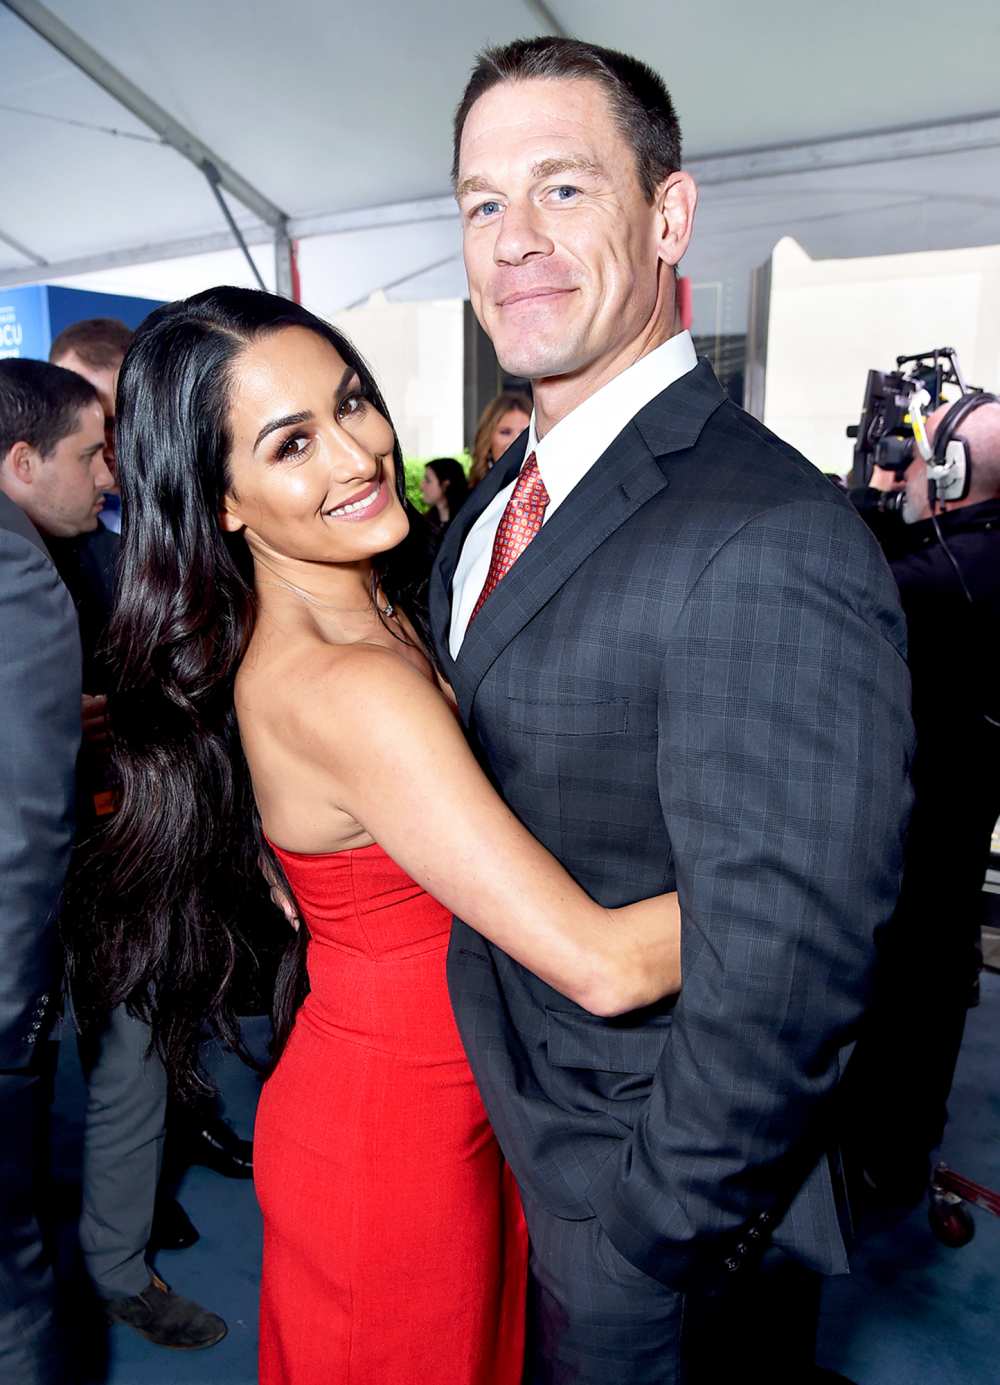 John Cena and Nikki Bella attend 2017 NBCUniversal Upfront in New York City.